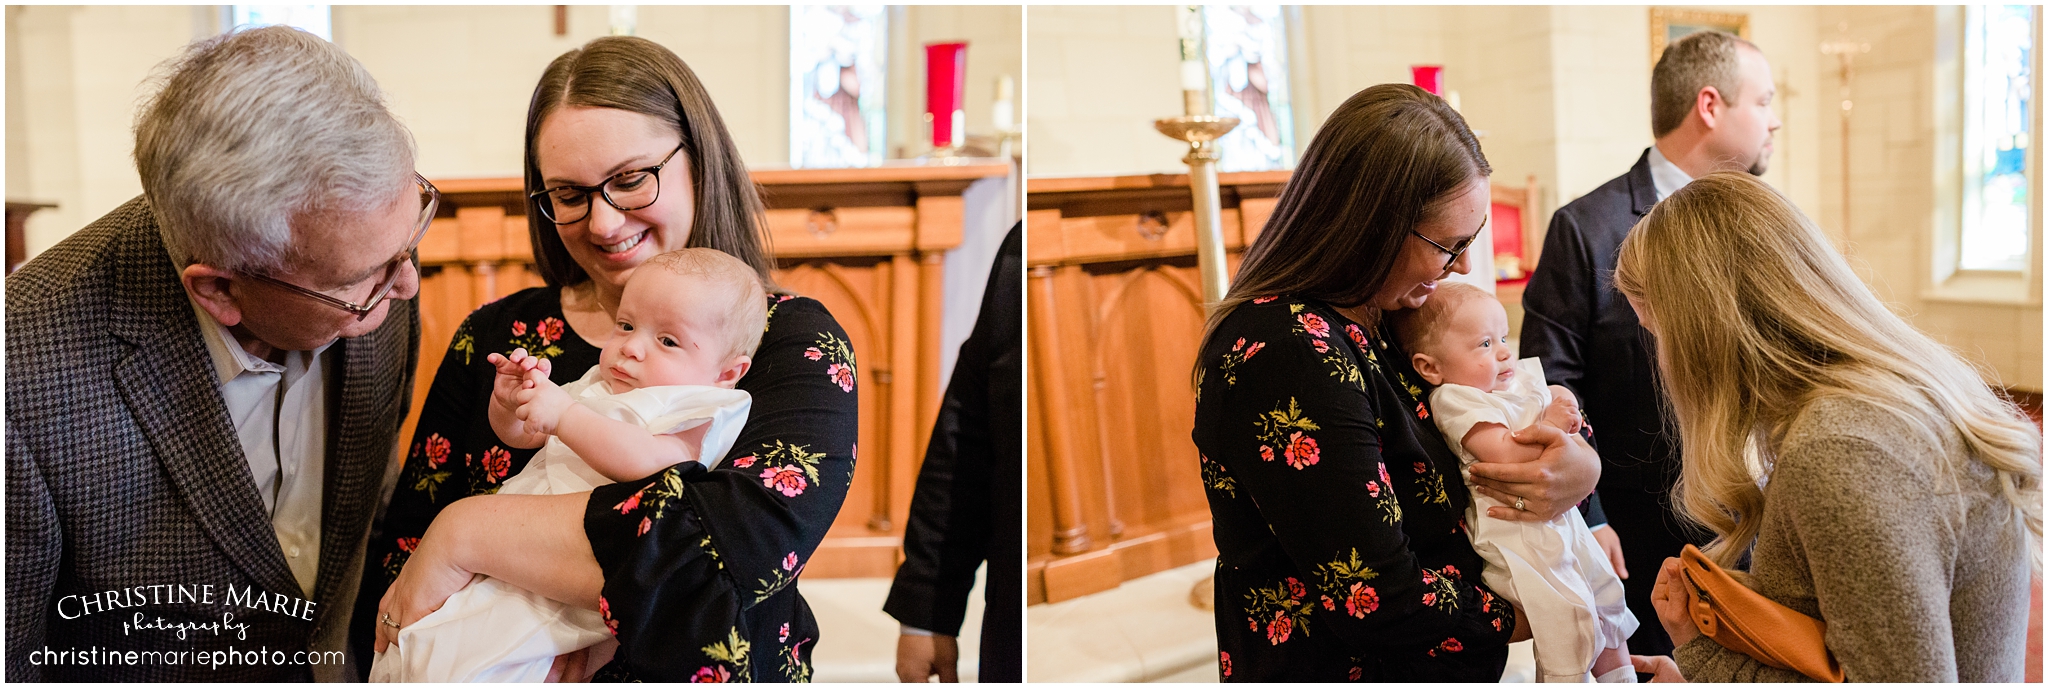 roswell baptism photographer, christine marie photography